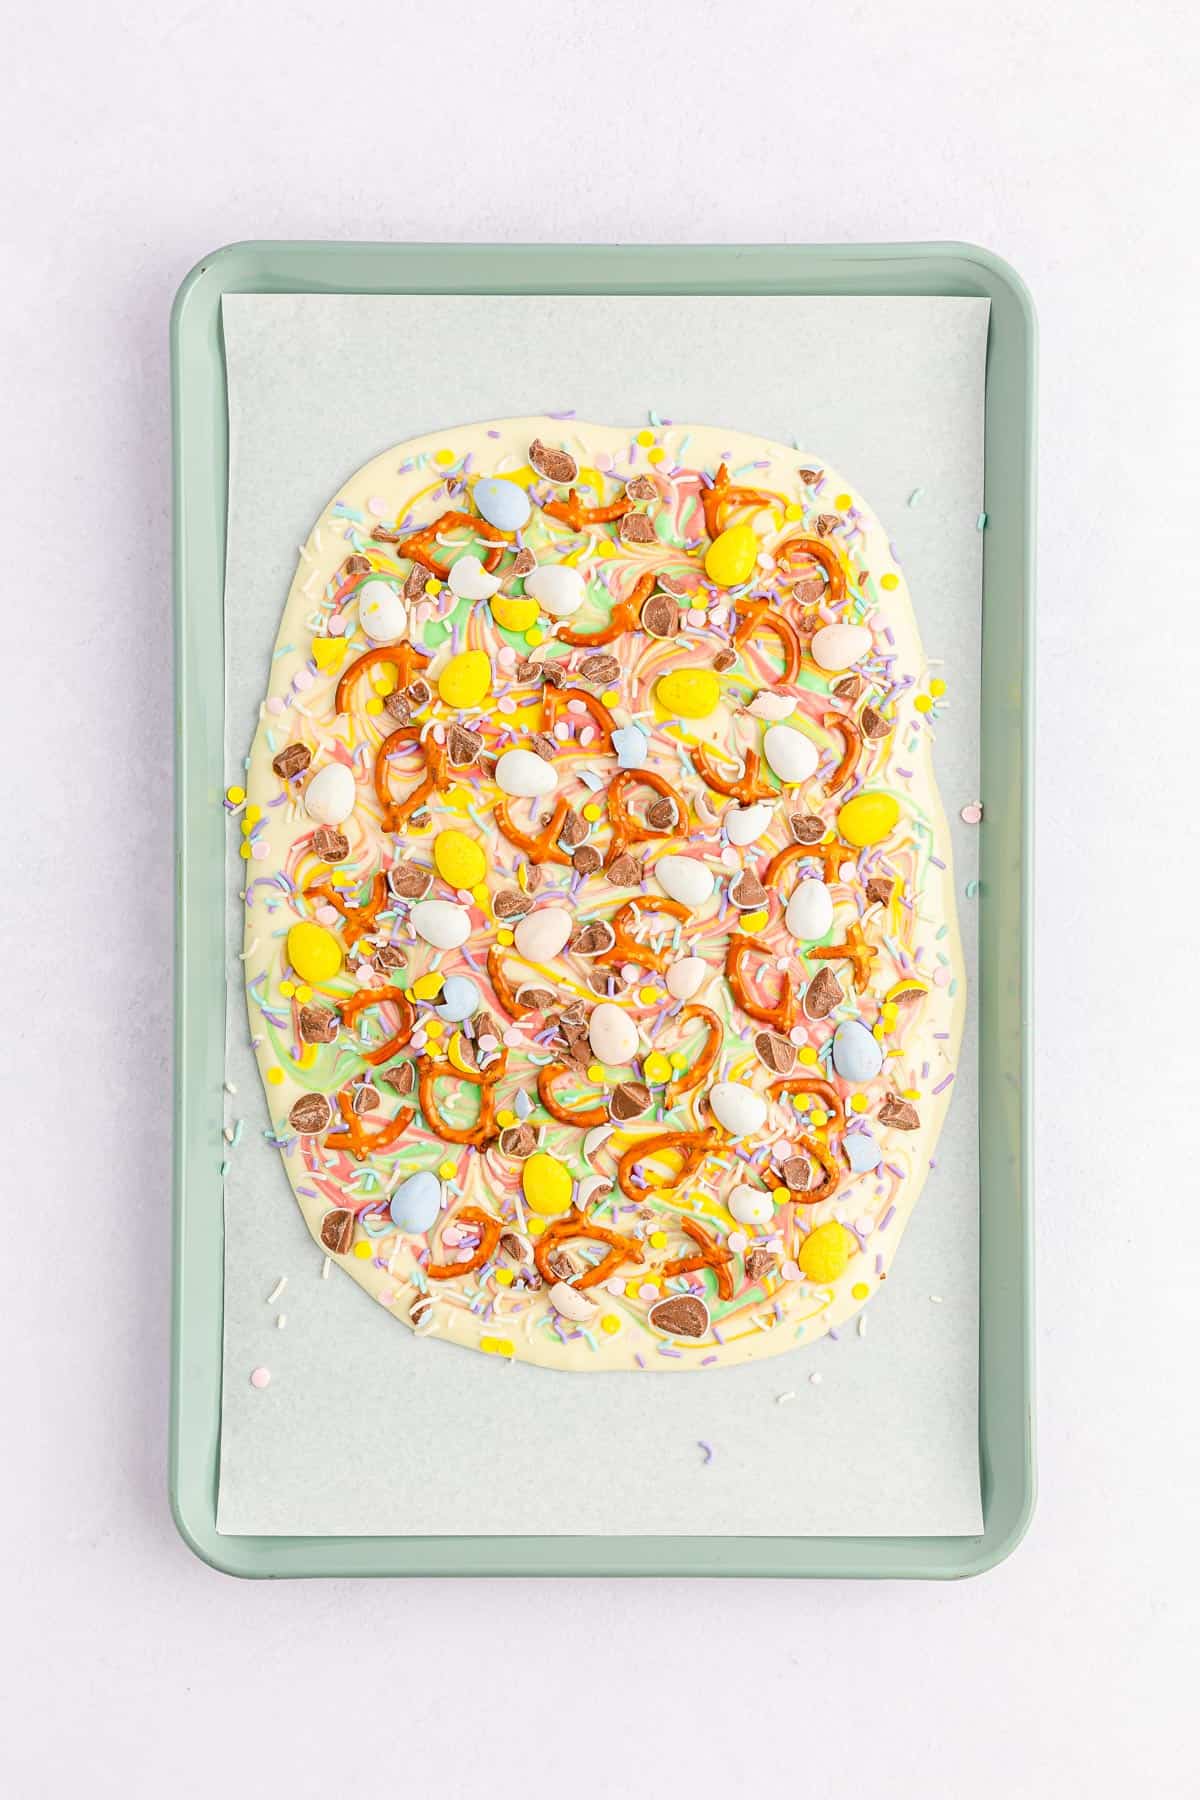 White chocolate topped with mini eggs, pretzels, and sprinkles to make Easter bark.